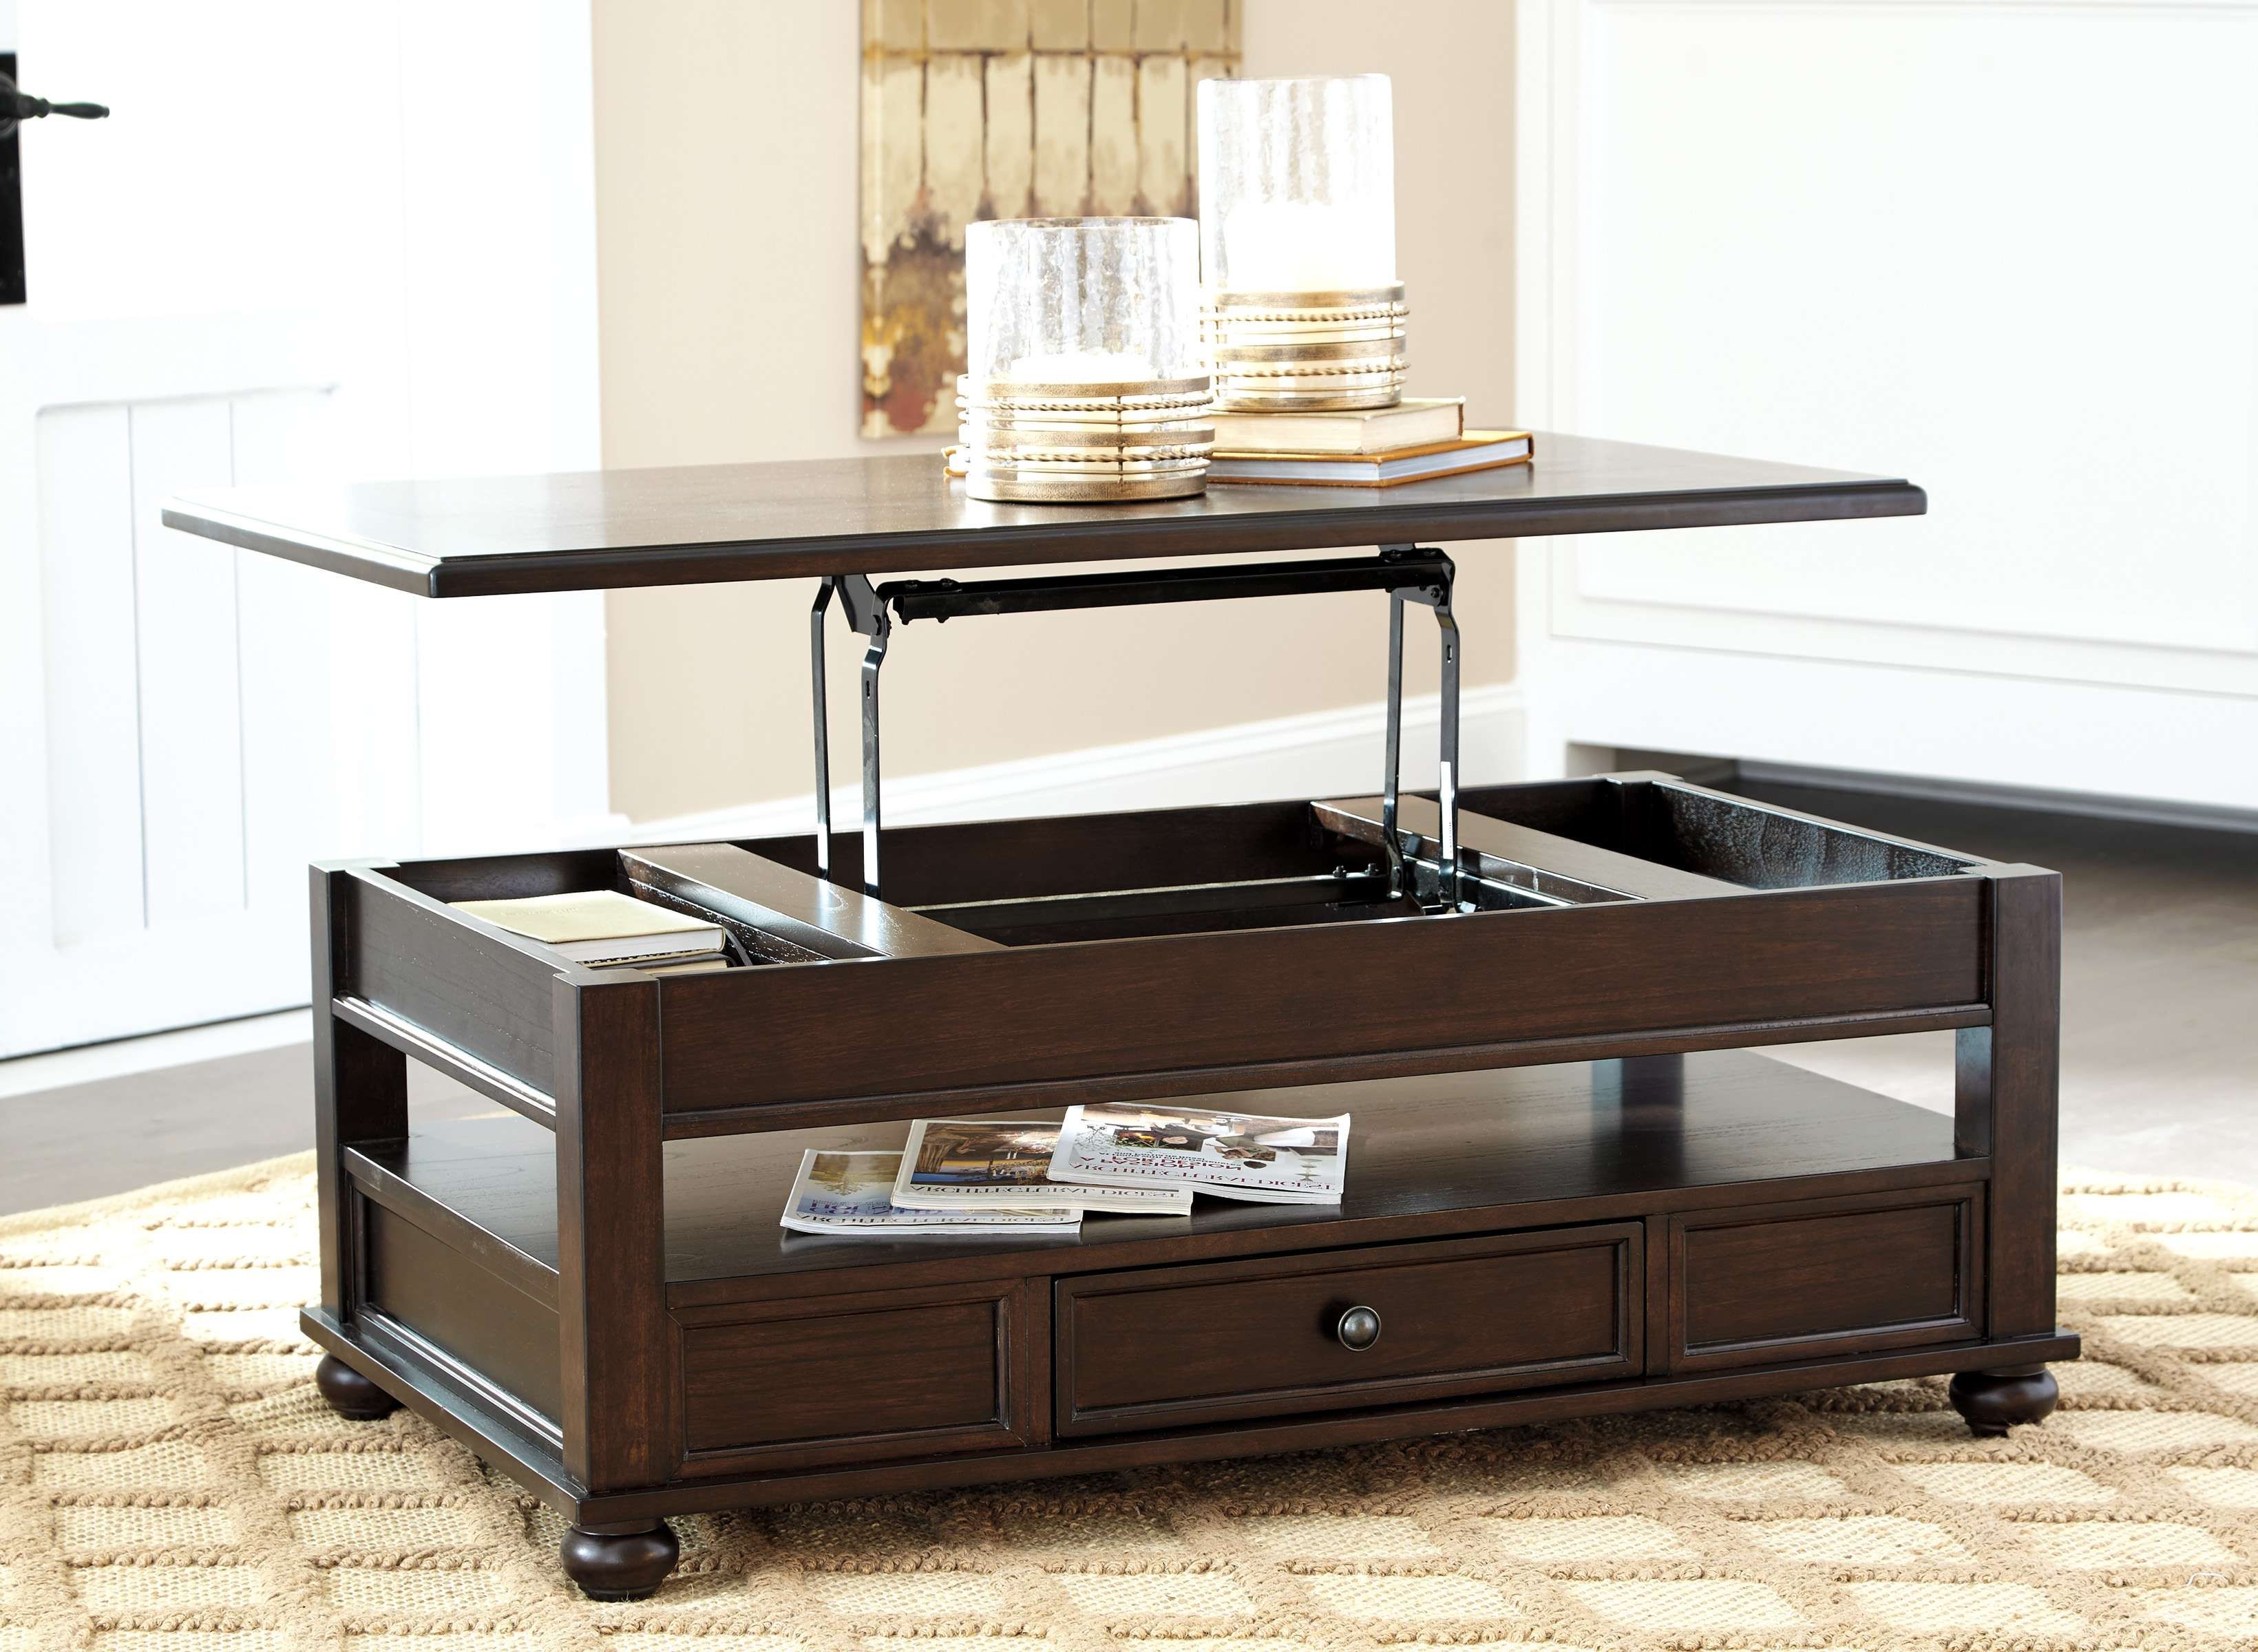 Coffee Tables : Square Lift Top Table Small Coffee Carlyle With With Regard To Most Recent Raise Up Coffee Tables (View 18 of 20)